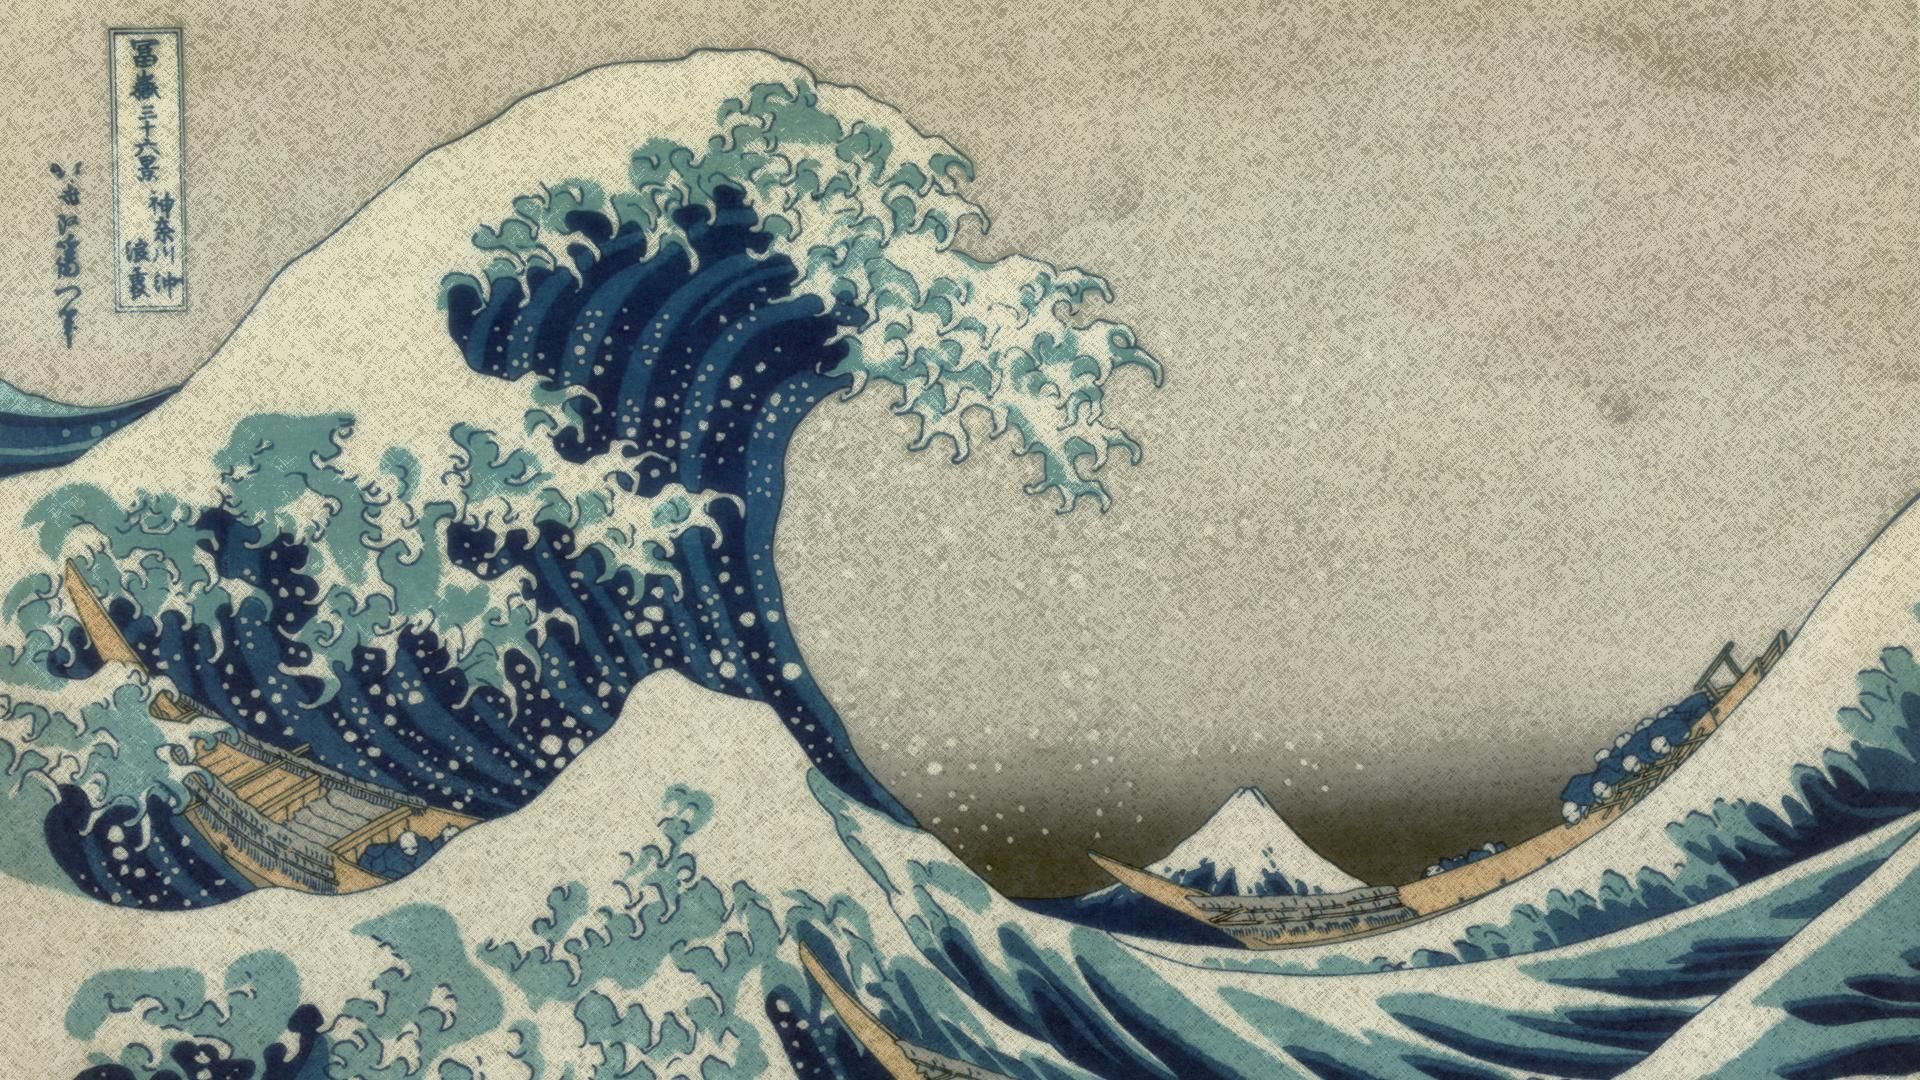 undefined The Great Wave Wallpaper (28 Wallpaper). Adorable Wallpaper. Japanese wave painting, Hokusai great wave, Wave art